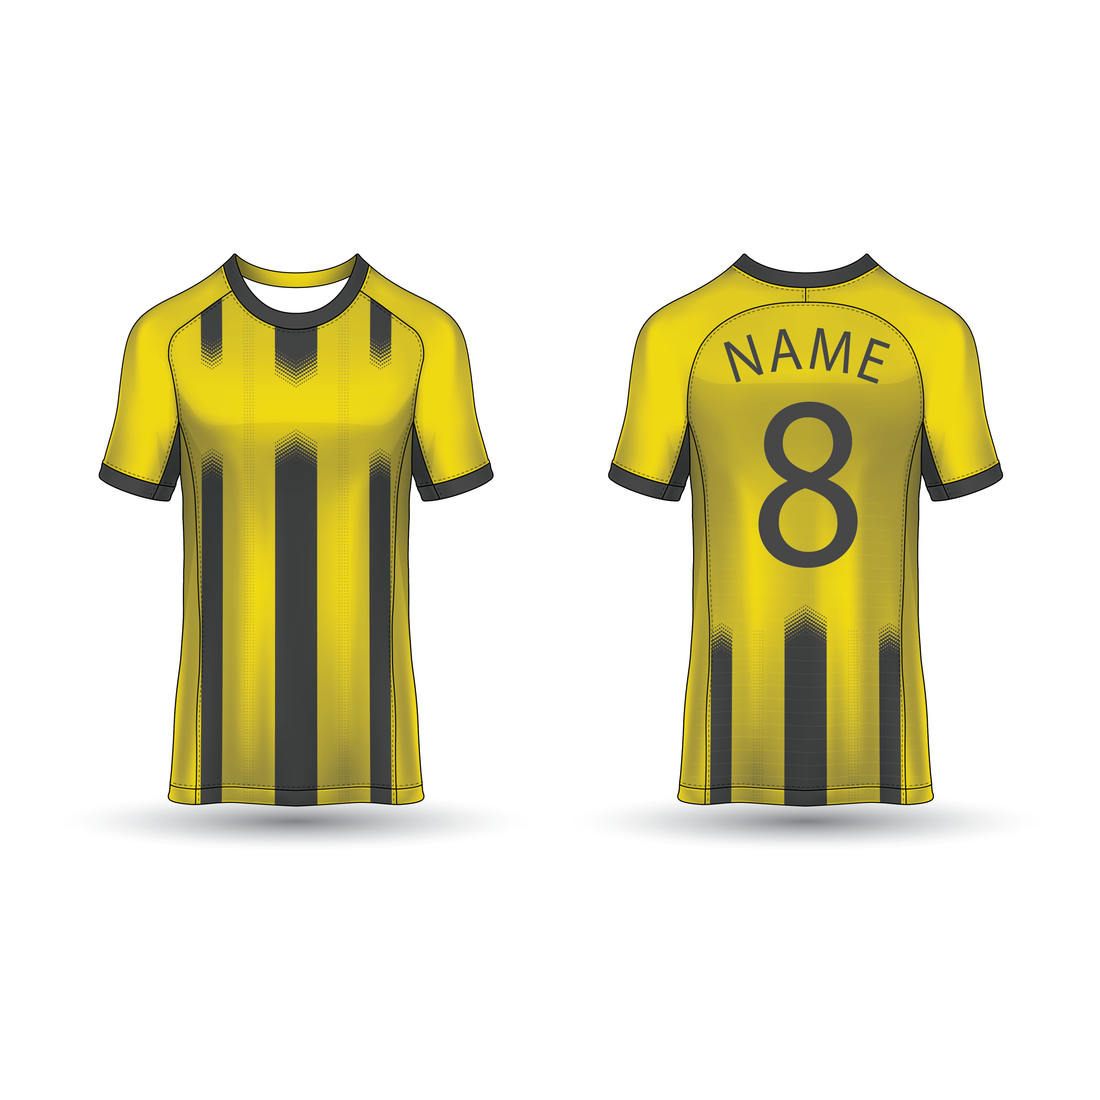 NEXT PRINT All Over Printed Customized Sublimation T-Shirt Unisex Sports Jersey Player Name & Number, Team Name NP50000246